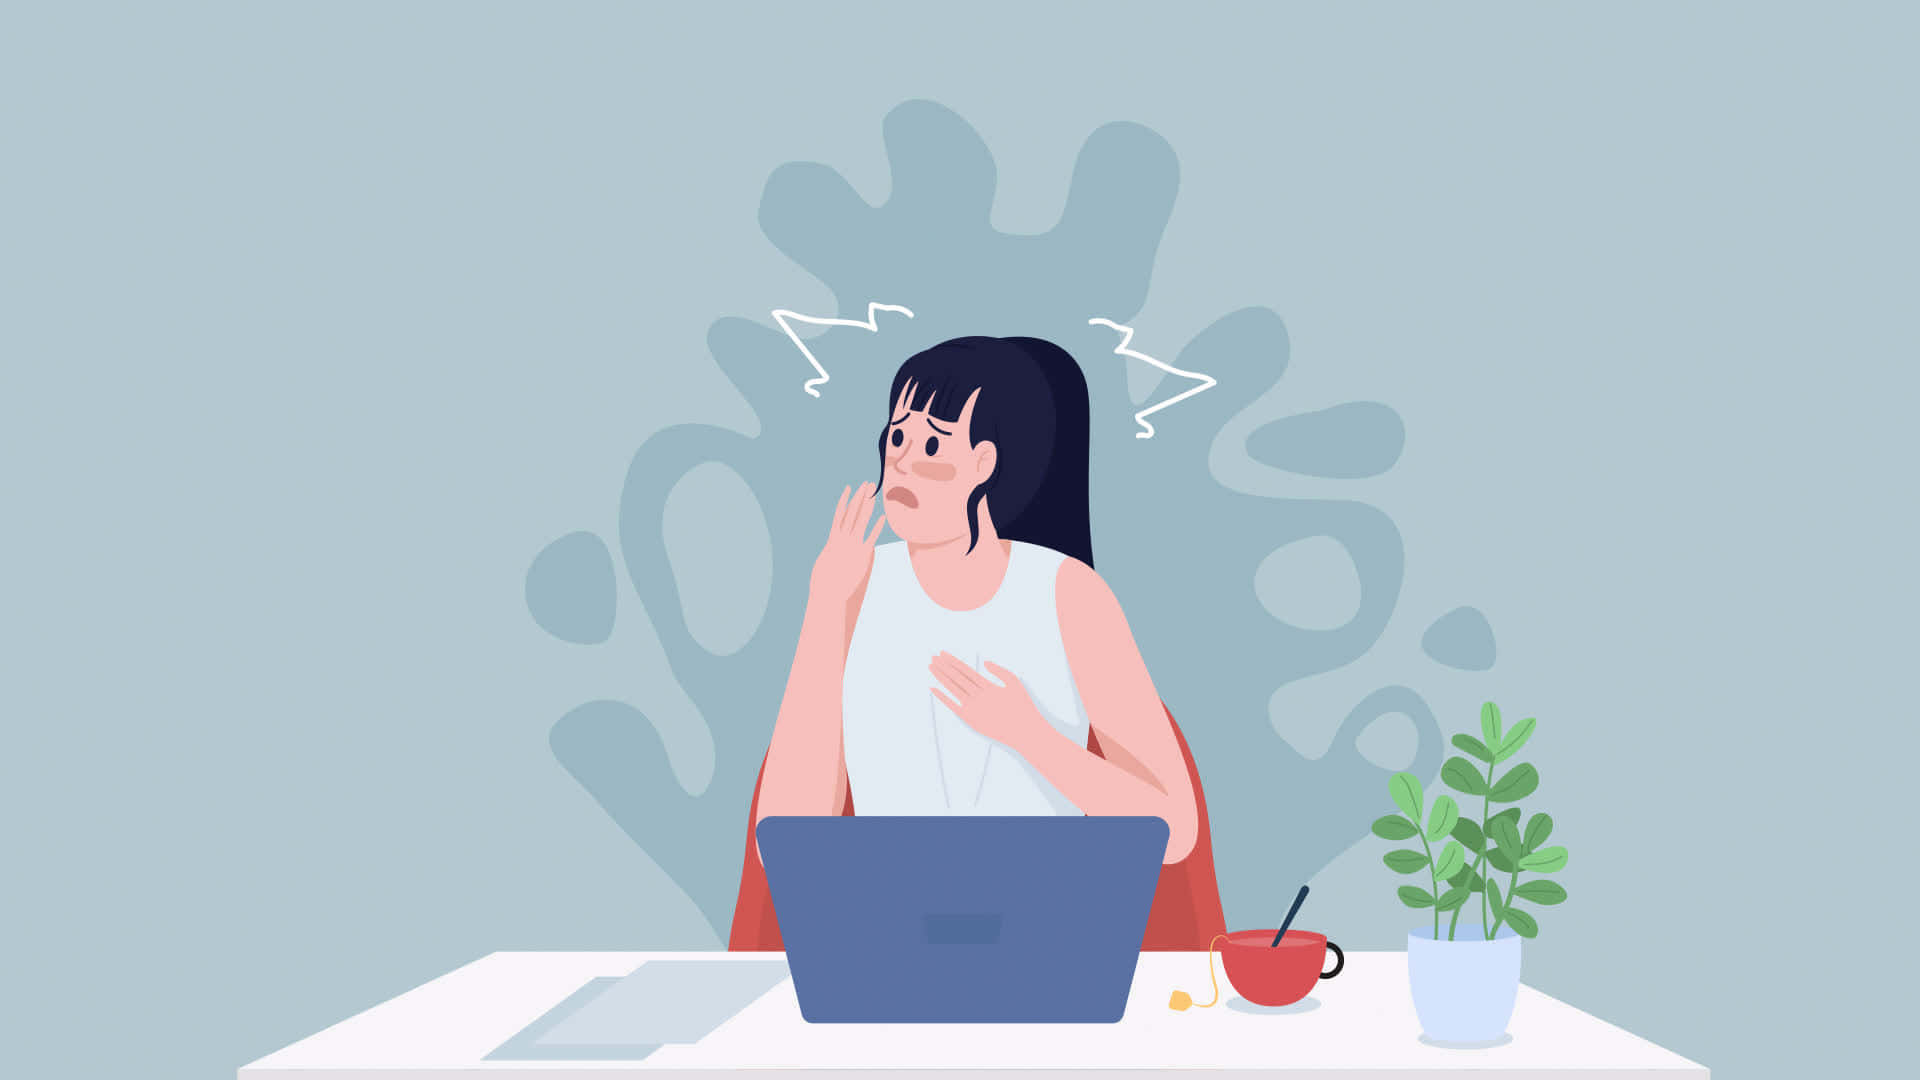 Stress Depicted In An Illustration Background